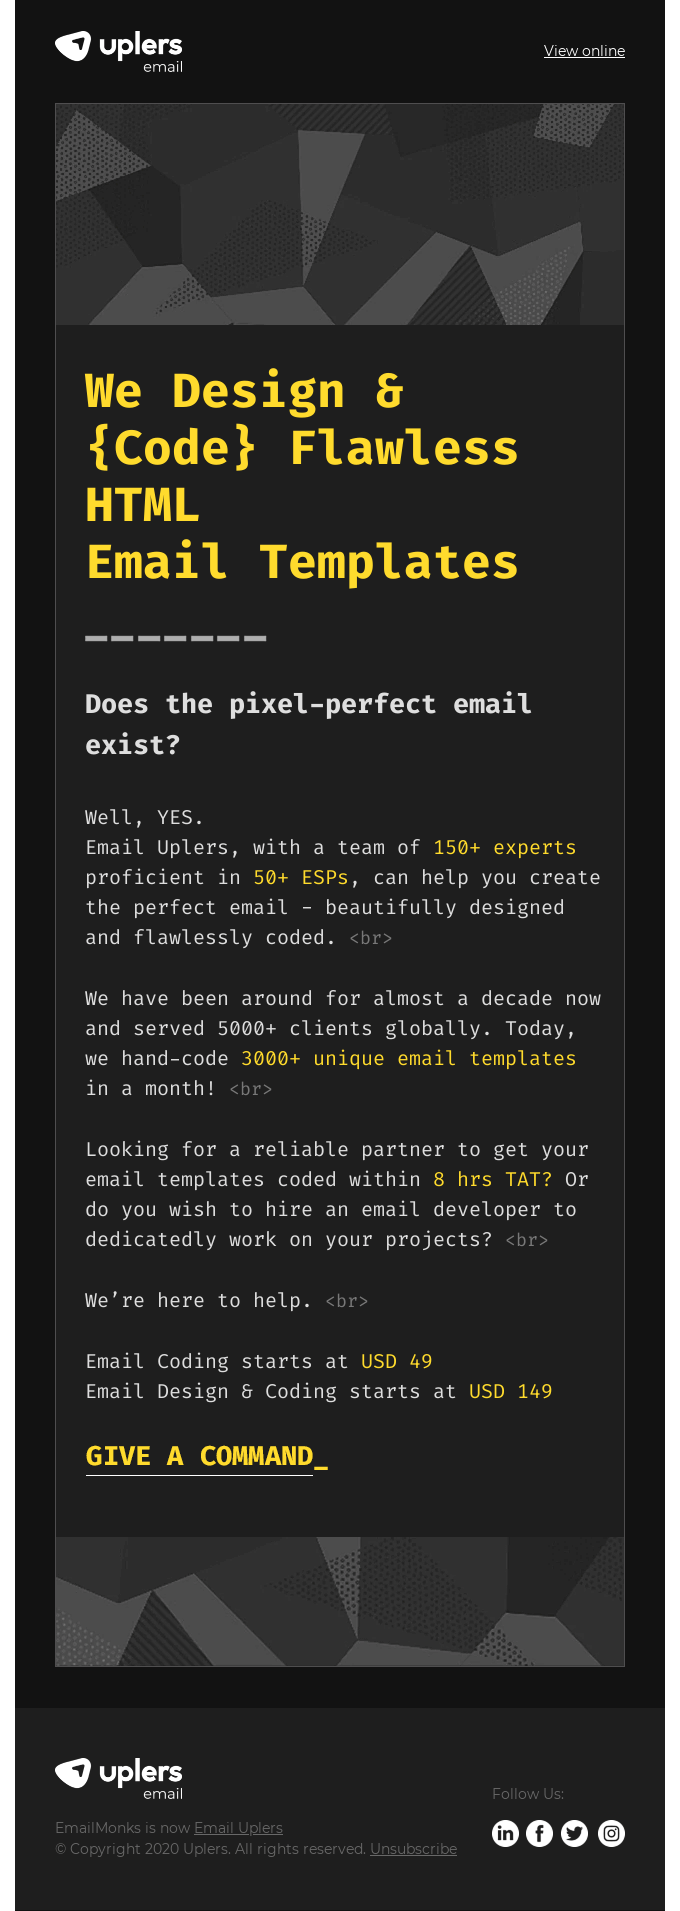 Perfect email templates are now a reality